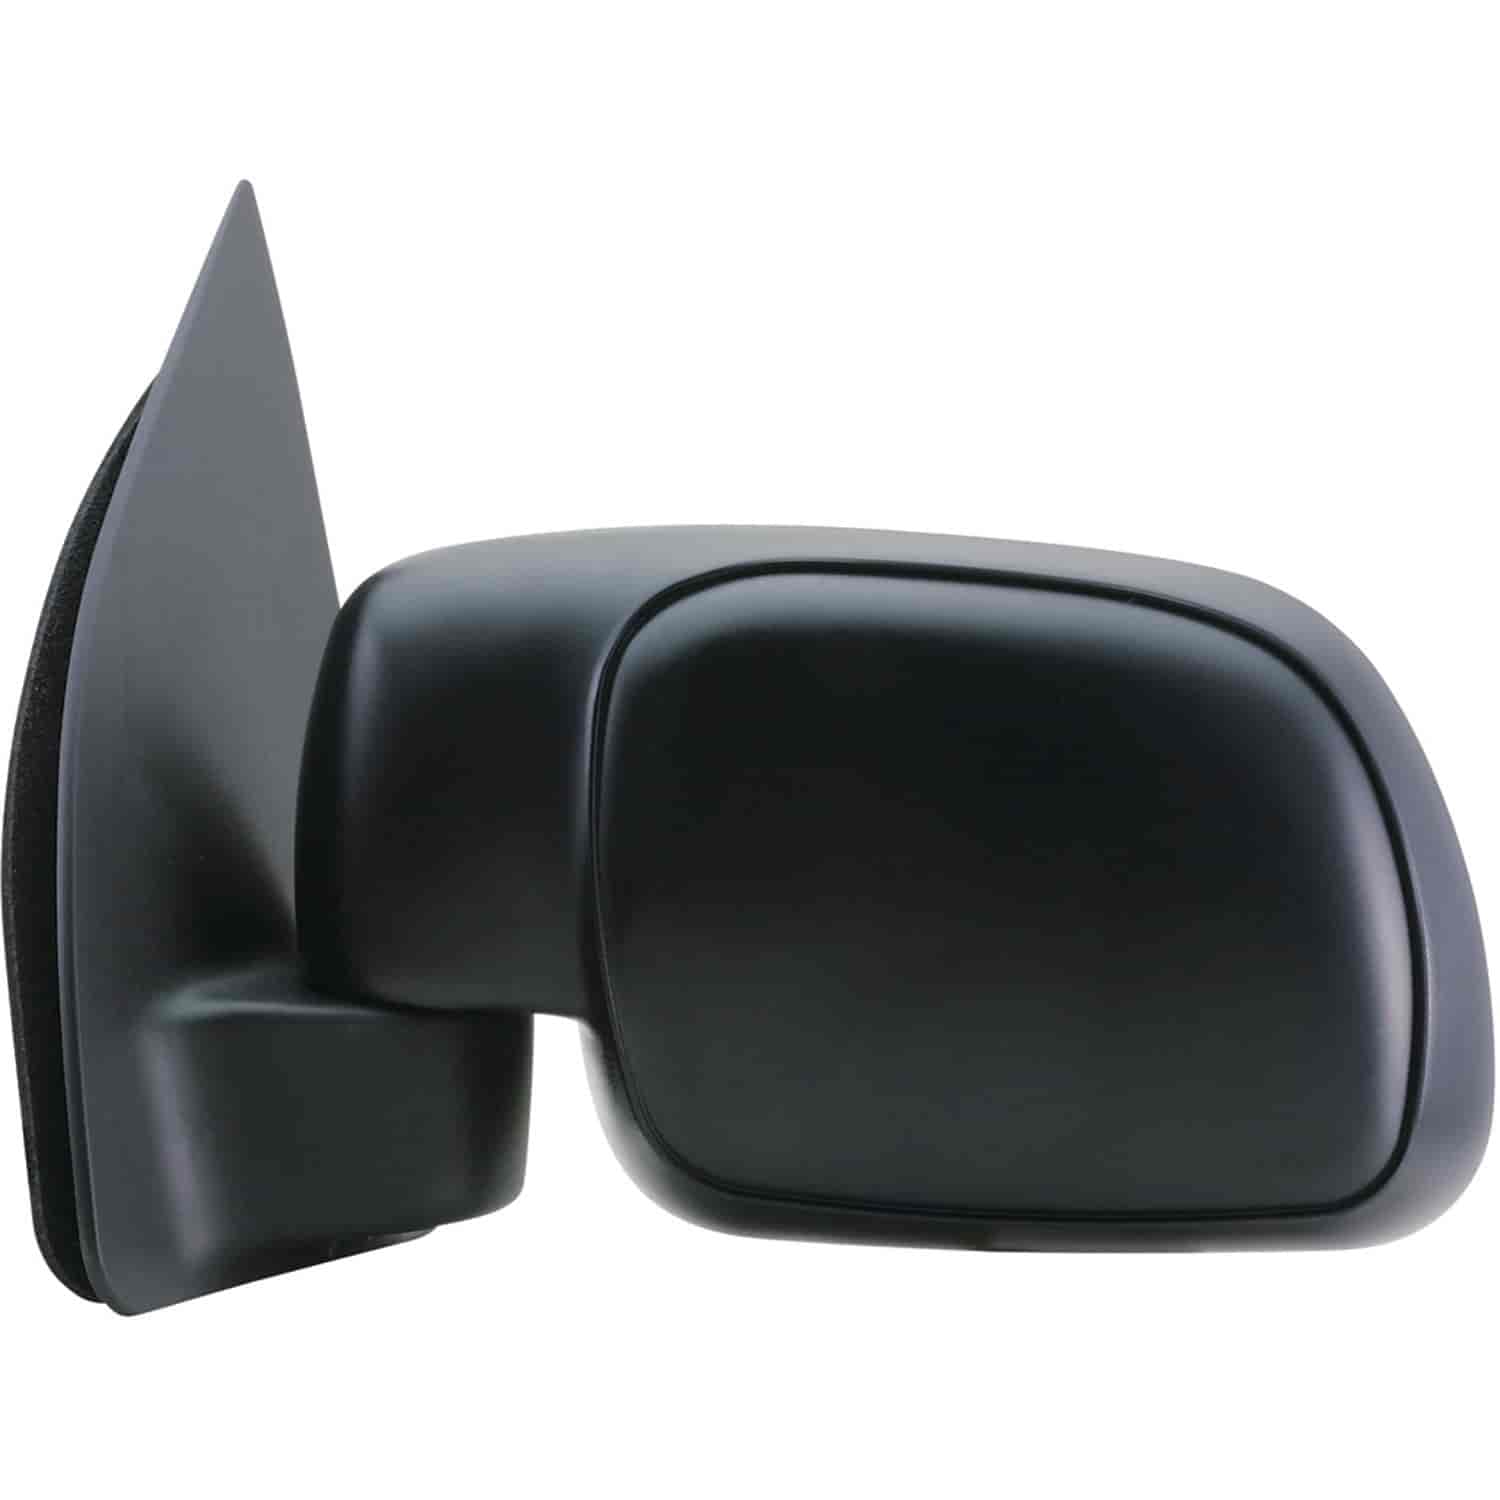 OEM Style Replacement Mirror Fits 1999 to 2010 Ford F-Series Super Duty